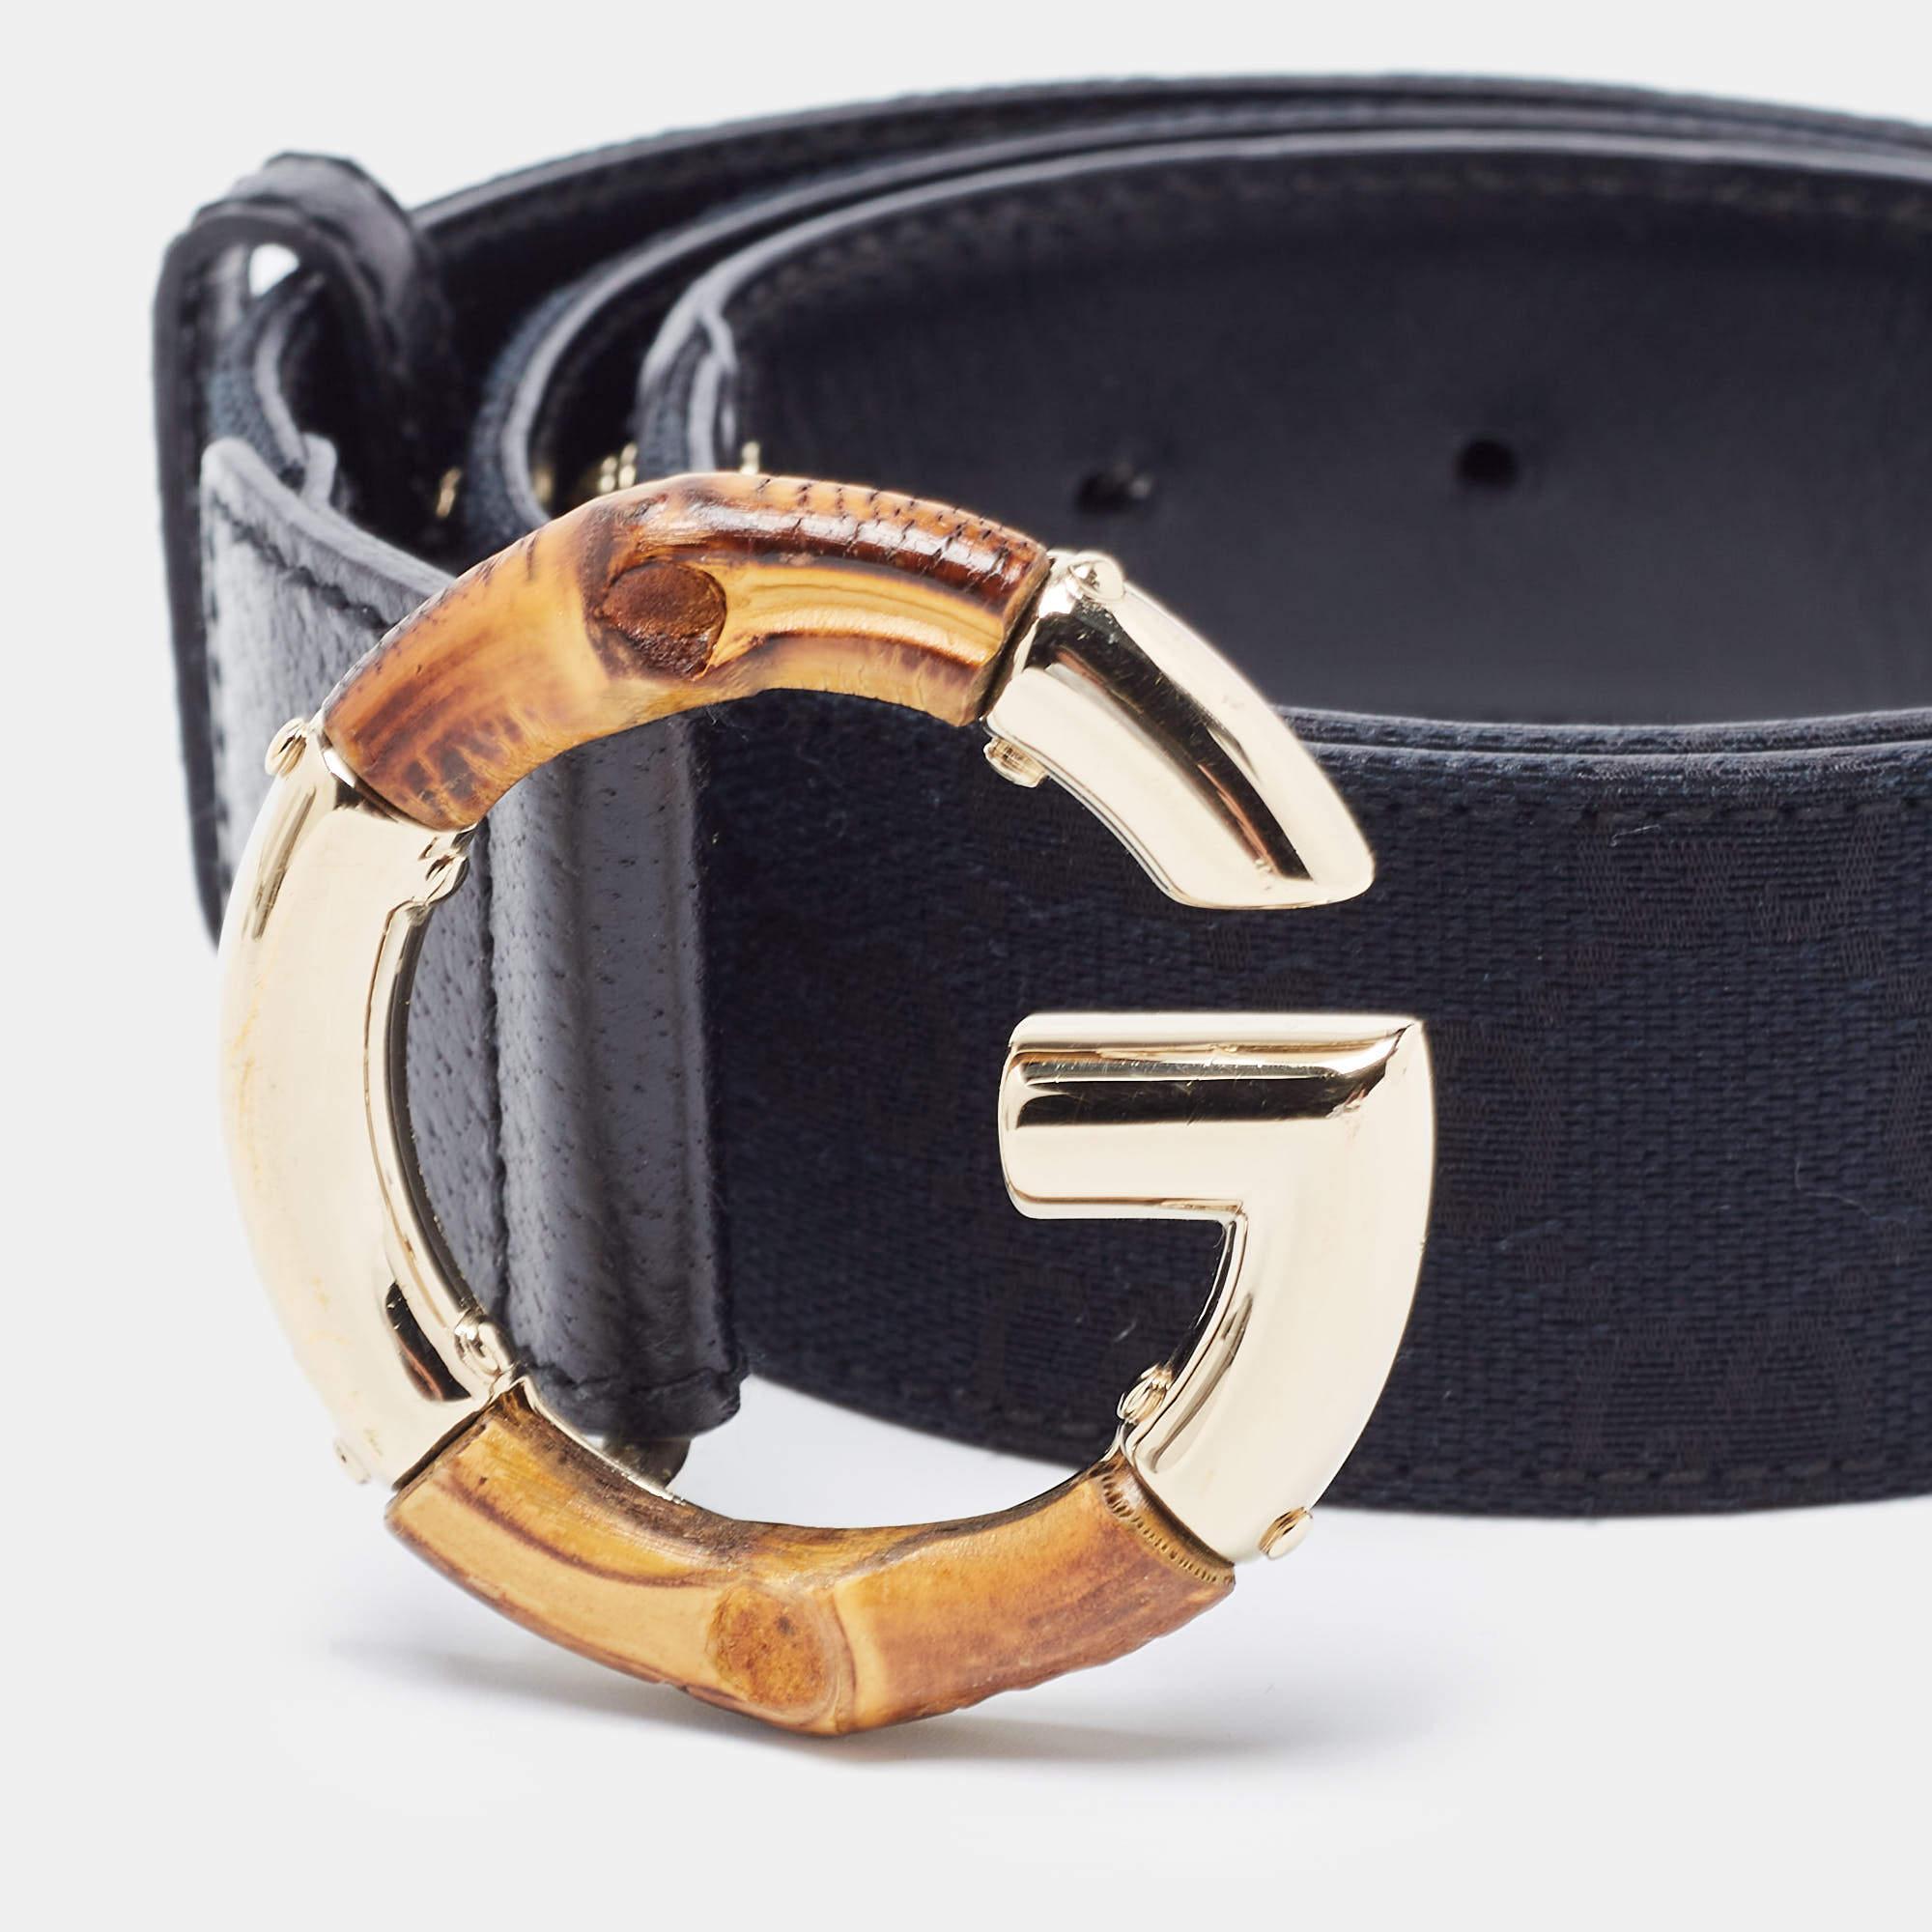 This Gucci black belt will add the perfect finishing touch to your outfit. Crafted from GG canvas and leather, It features a bamboo and polished gold buckle.

